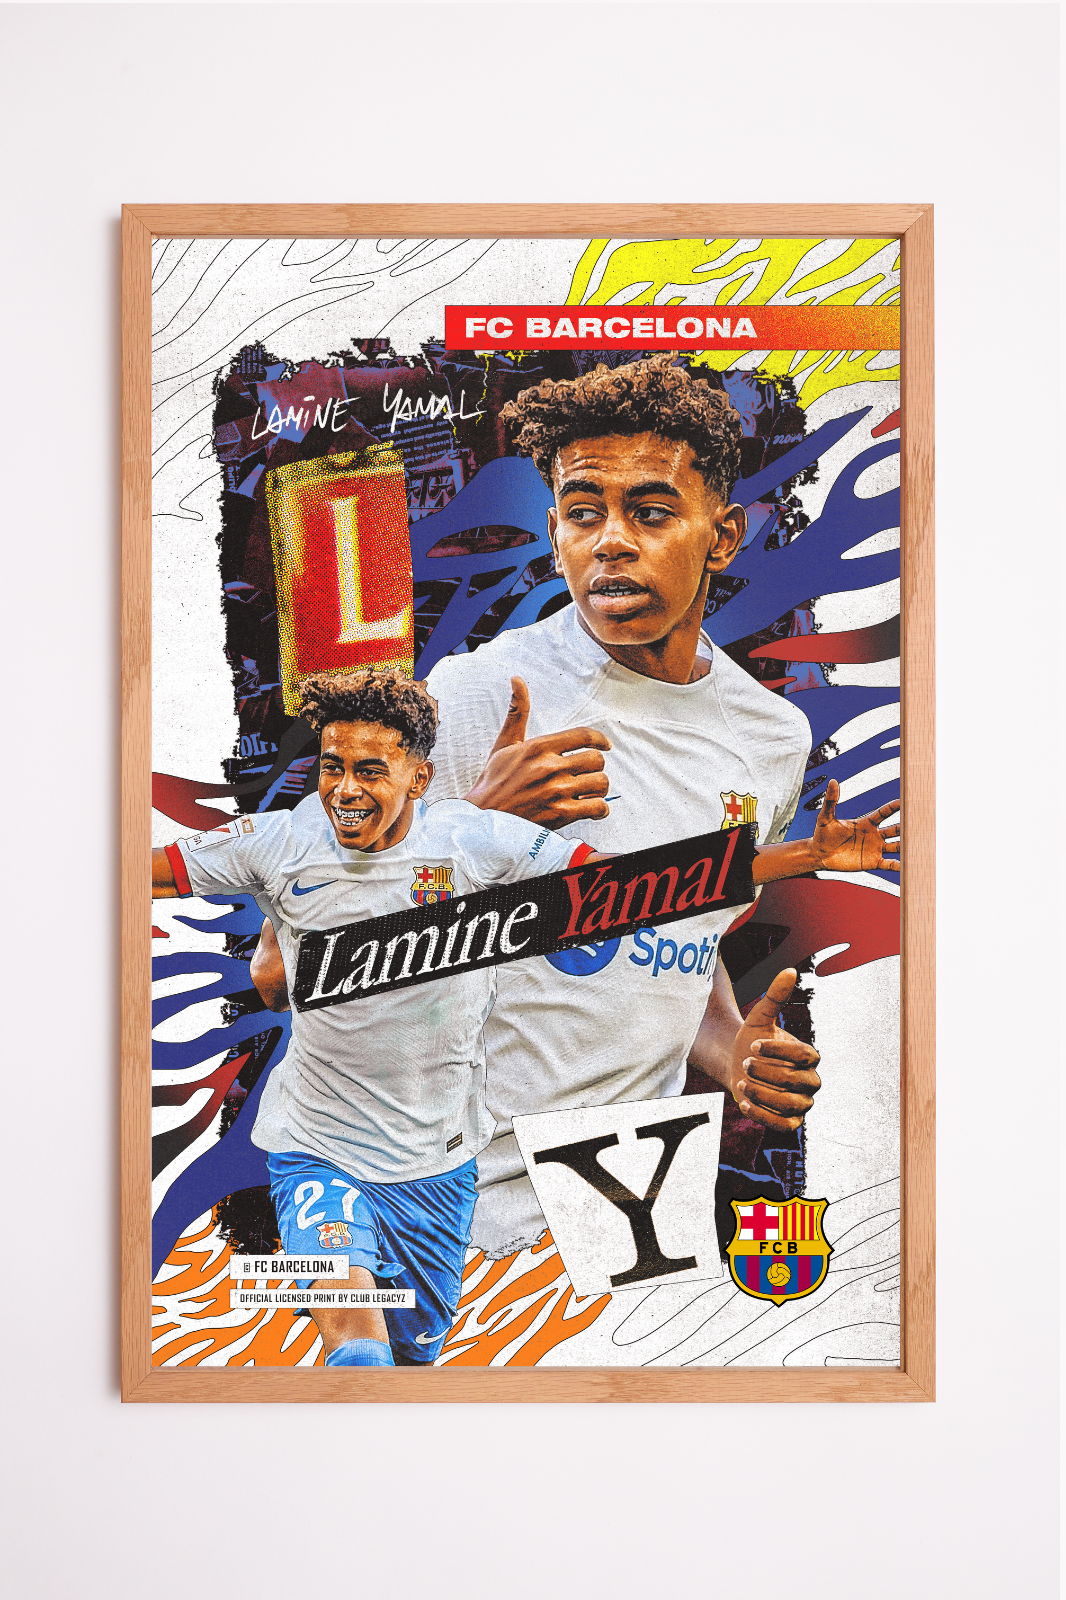 FC Barcelona - Lamine Yamal poster limited to 999